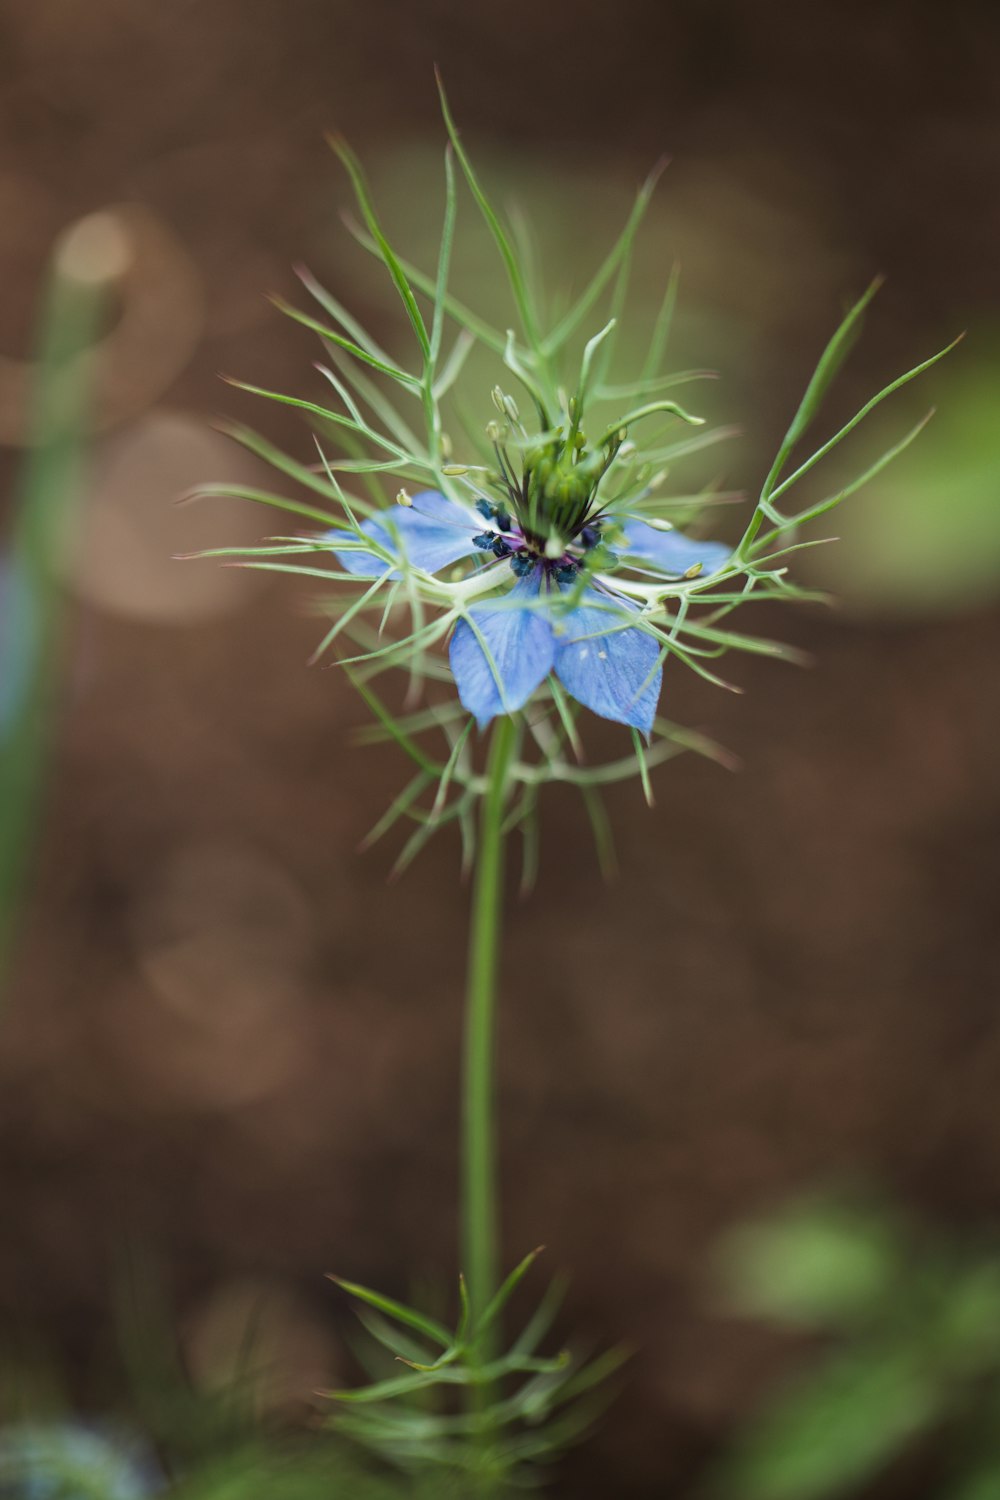 a blue flower with green stems in the foreground